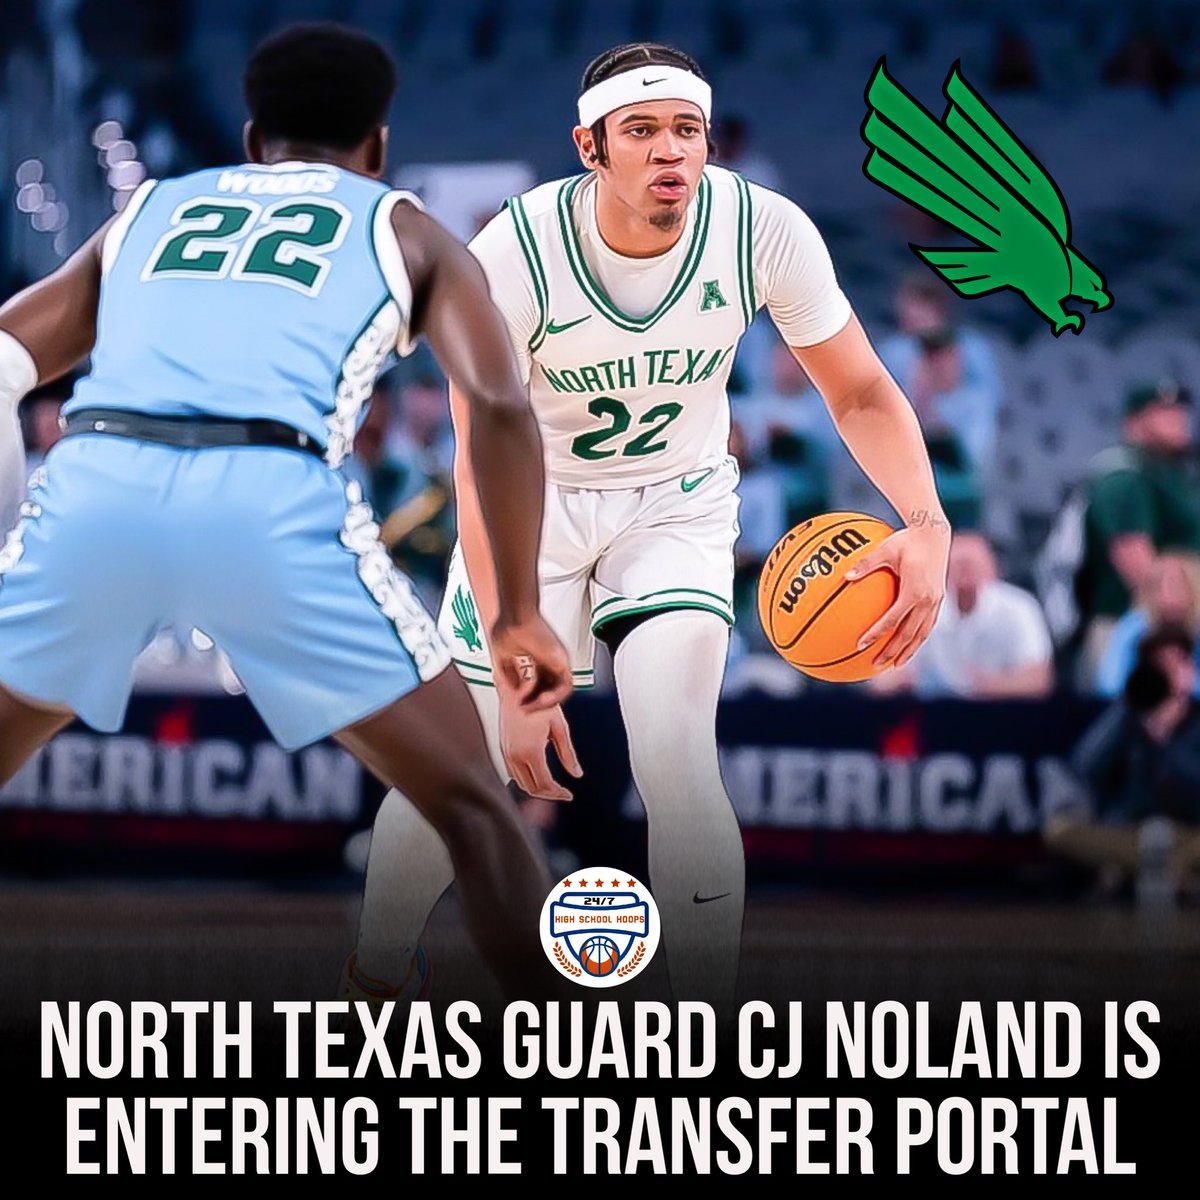 NEWS: North Texas guard CJ Noland is entering the transfer portal, per source. Noland is a native of Waxahachie, Texas who began his career playing two seasons at Oklahoma before transferring to North Texas last spring. He averaged 10.9PPG, 2.8RPG, 2.0APG and 1.0SPG this